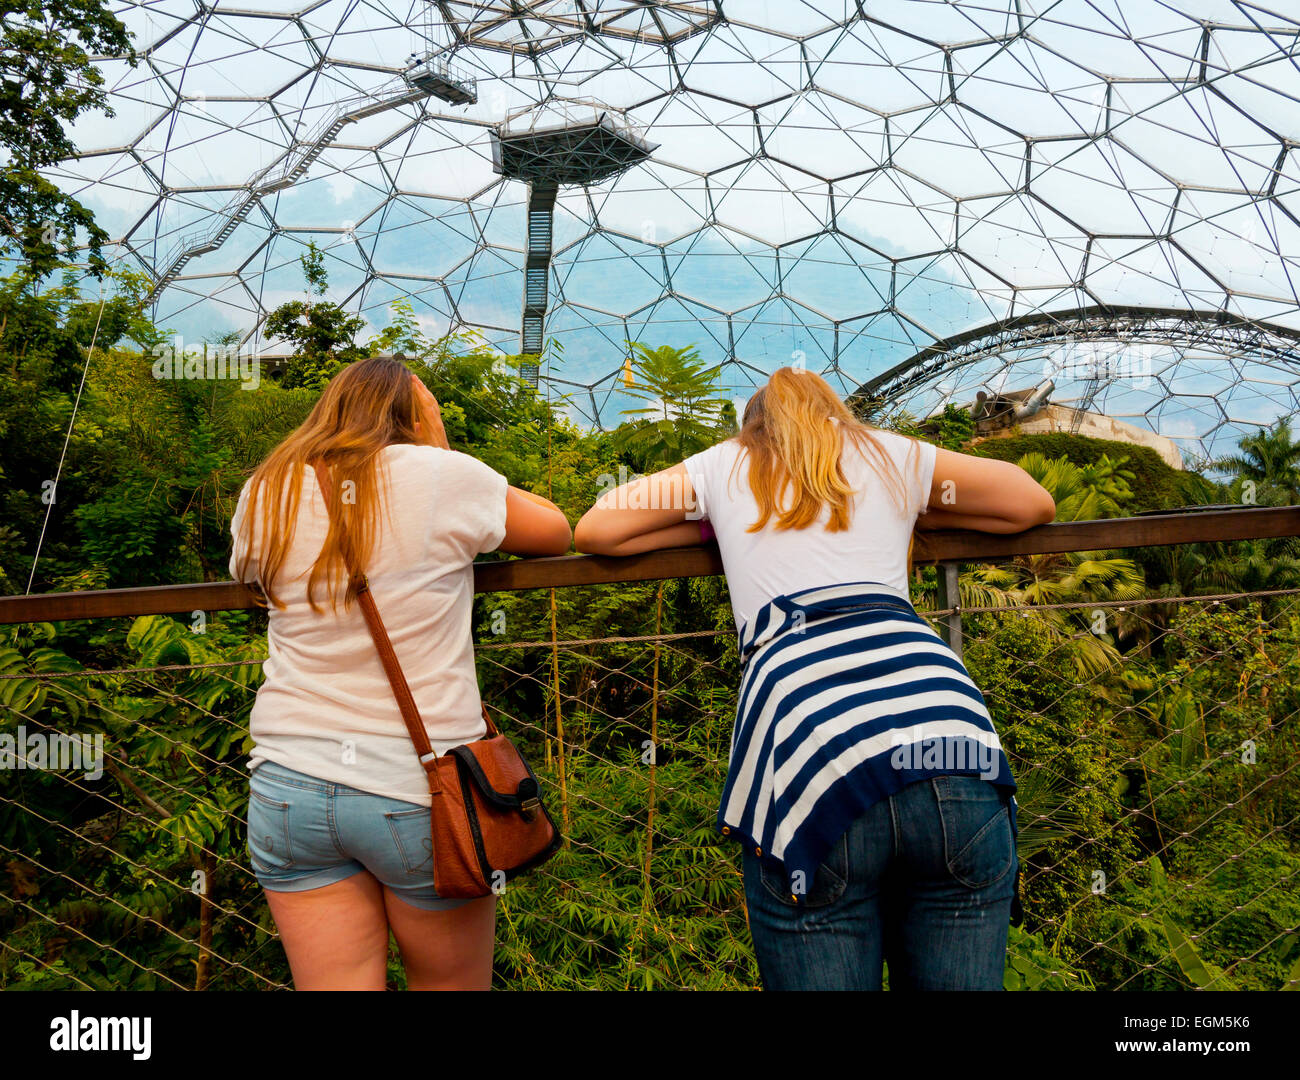 Two girls inside geodesic biome domes at the Eden Project near St Austell Cornwall England UK designed by Nicholas Grimshaw 2001 Stock Photo